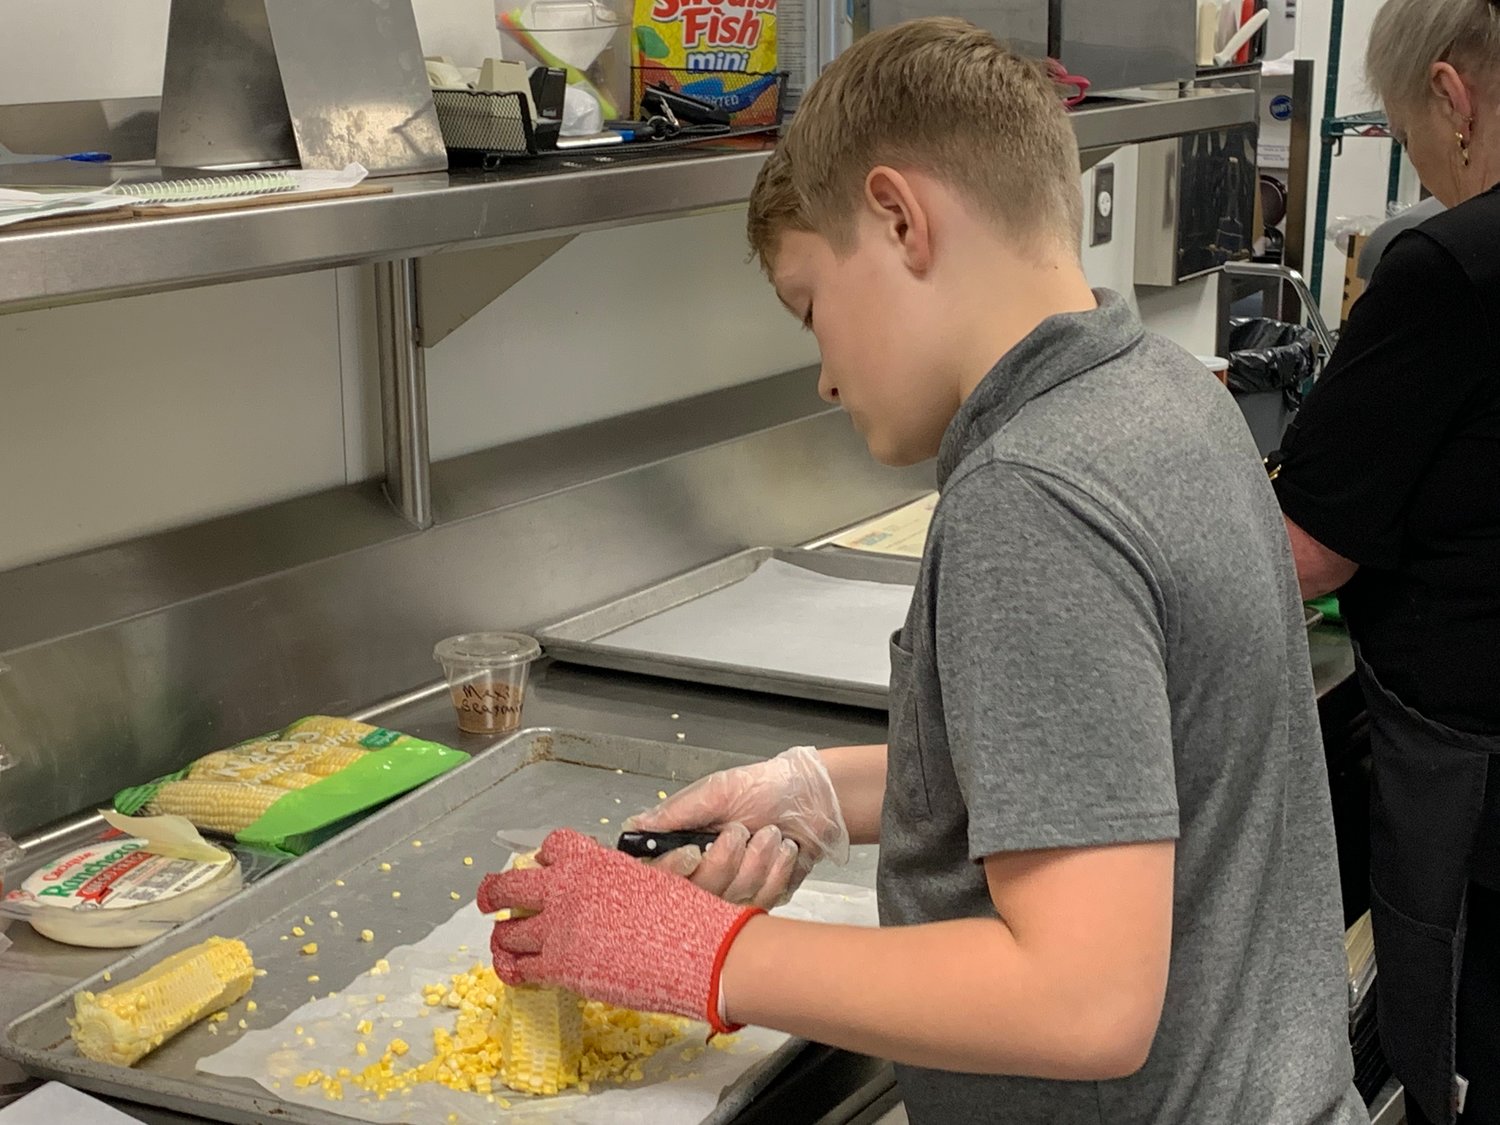 Eight Orin Smith Elementary School students competed in the Future Chefs National Challenge on Thursday. The challenge, which took place after school at Orin Smith, involved each student working with an adult to cook a healthy recipe they submitted prior to entering the competition. 